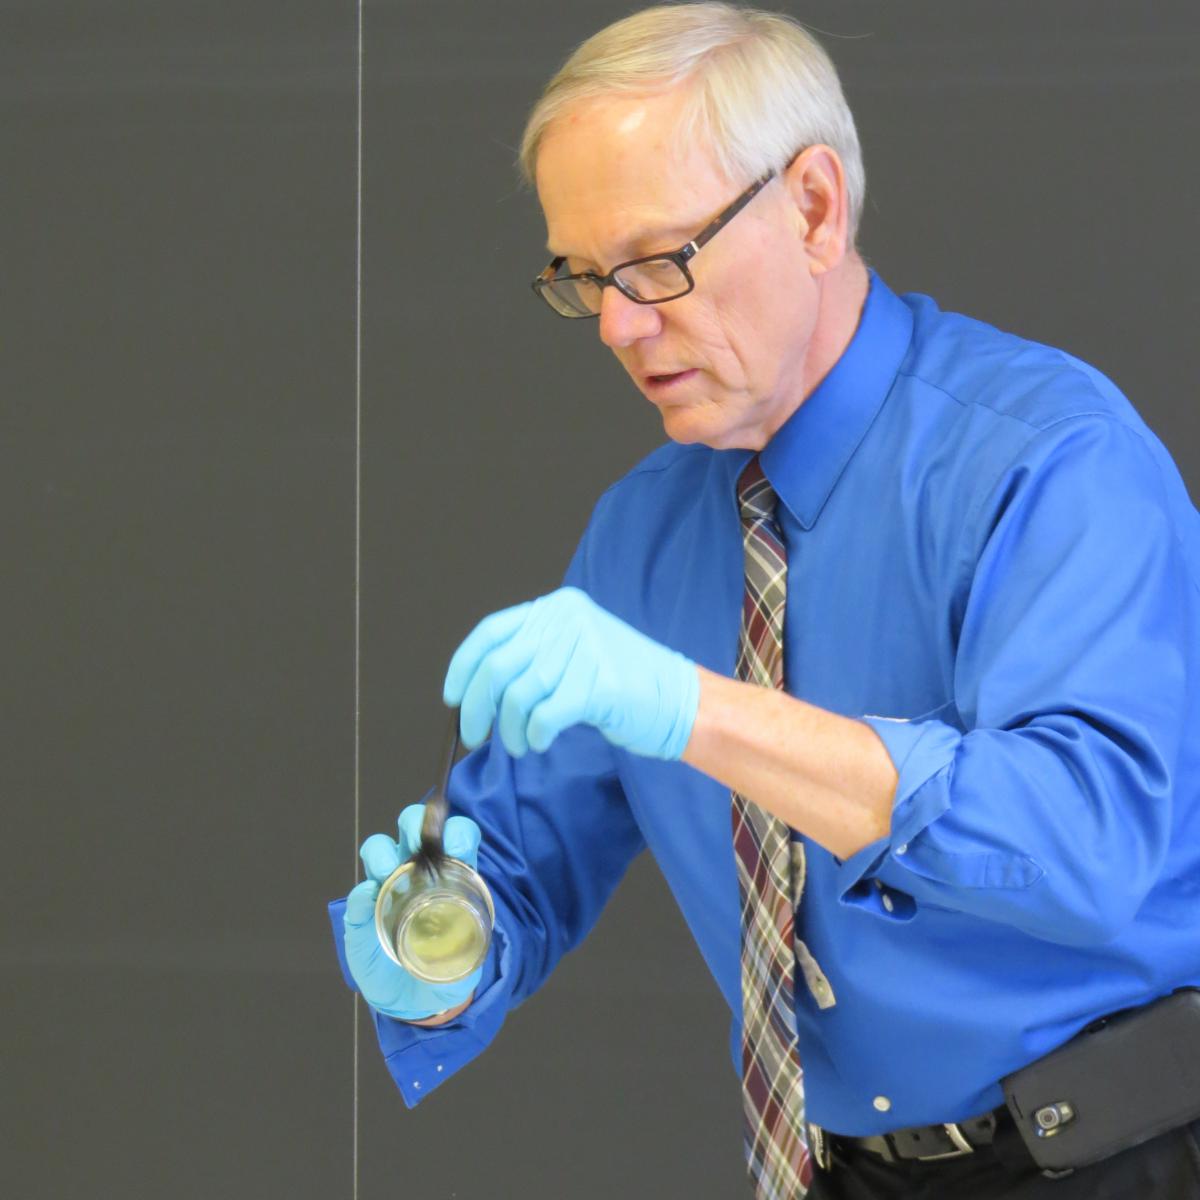 Millcreek Police Lt. Mike Dougan demonstrates evidence collection.